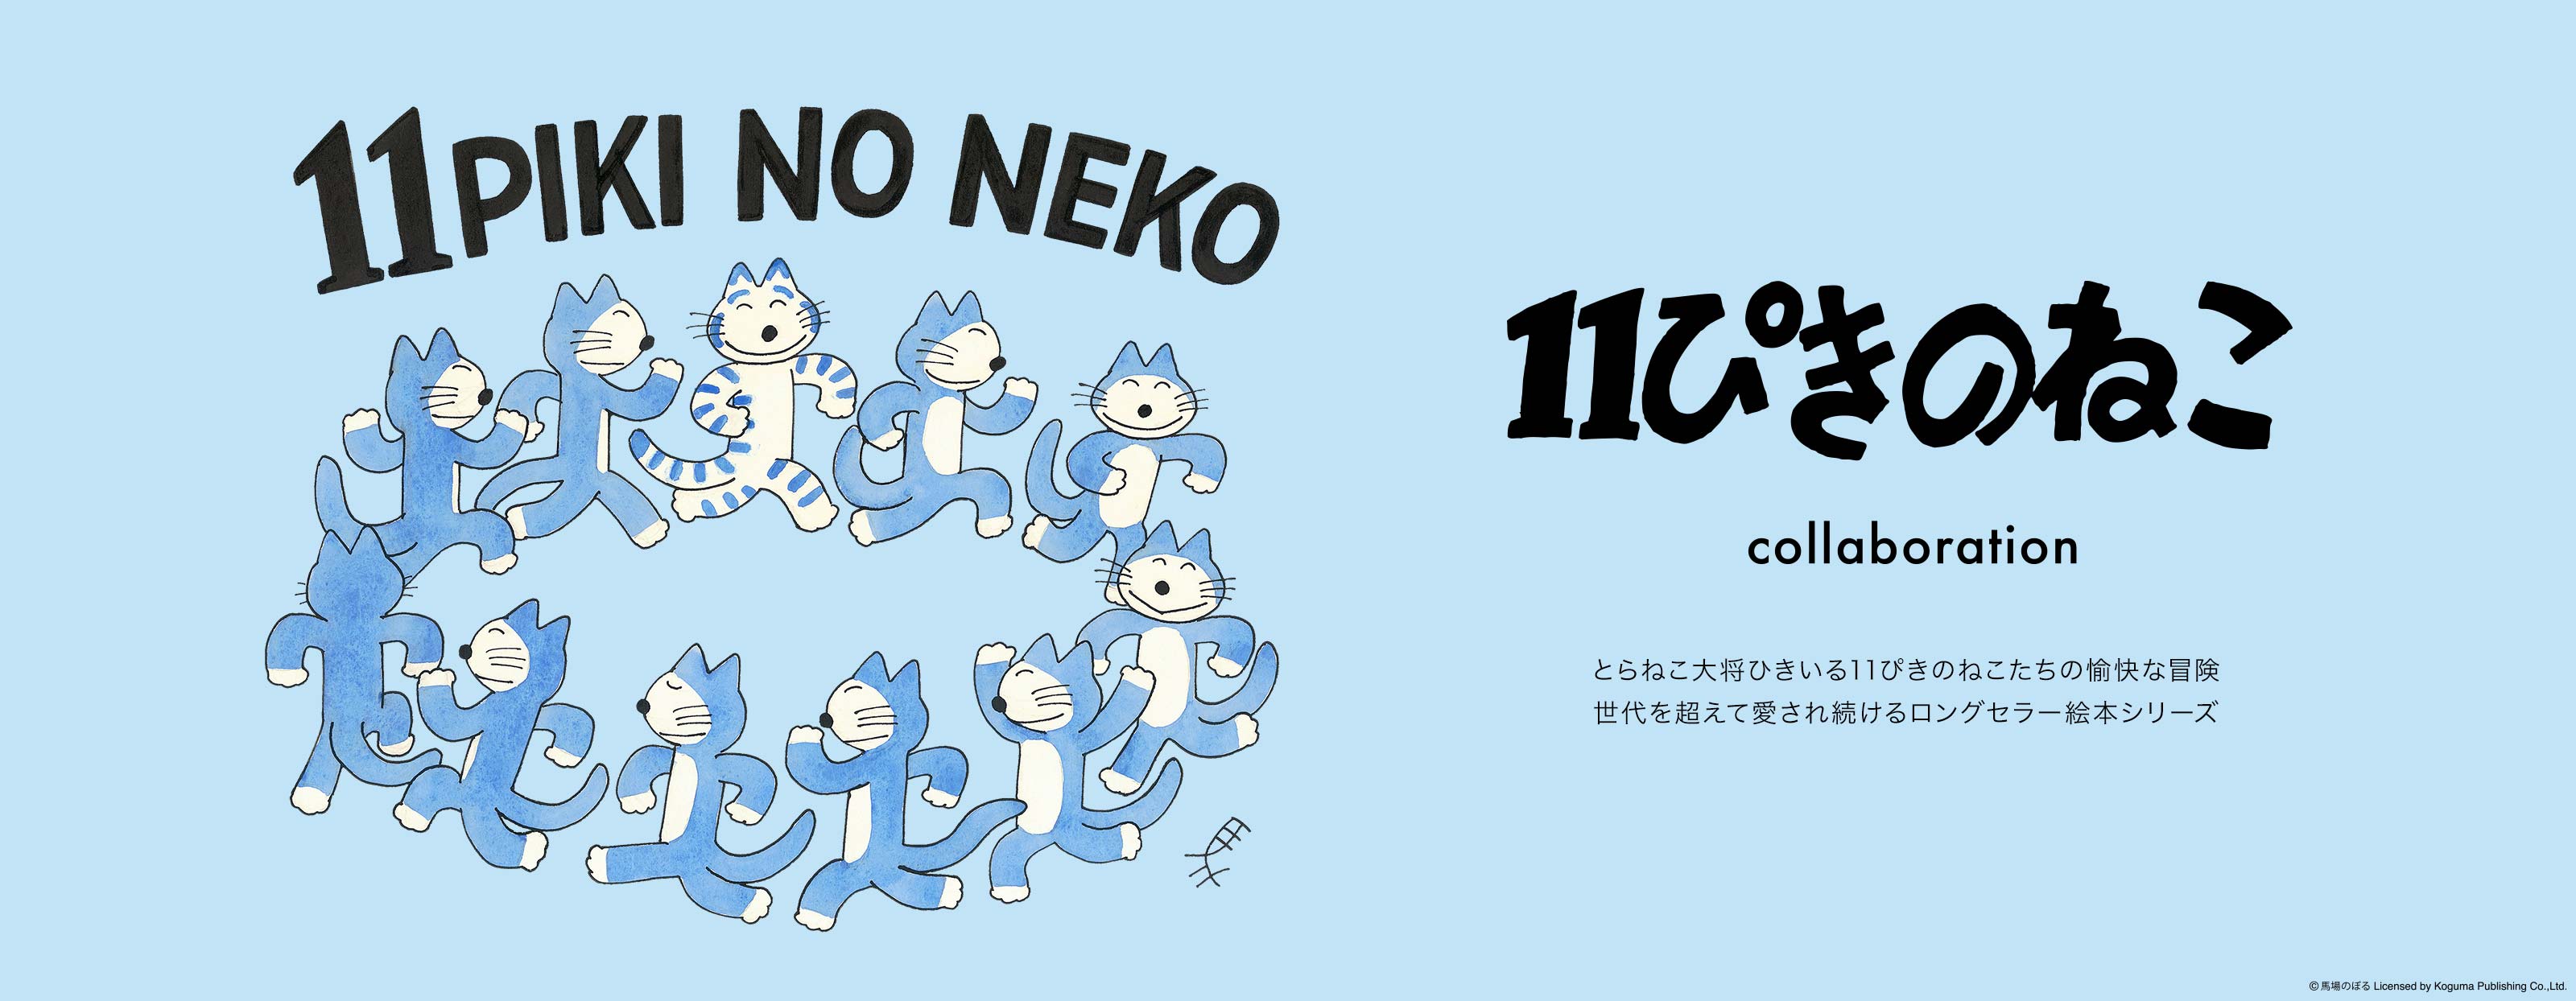 Since its publication in 1967, the picture book series of "11 Piki no Neko" (Eleven Cats) by Noboru Baba has been loved by parents and children in Japan and abroad.Please enjoy the collaborated items with the cats led by the teddy cat leader.[ssorder:-20230202]